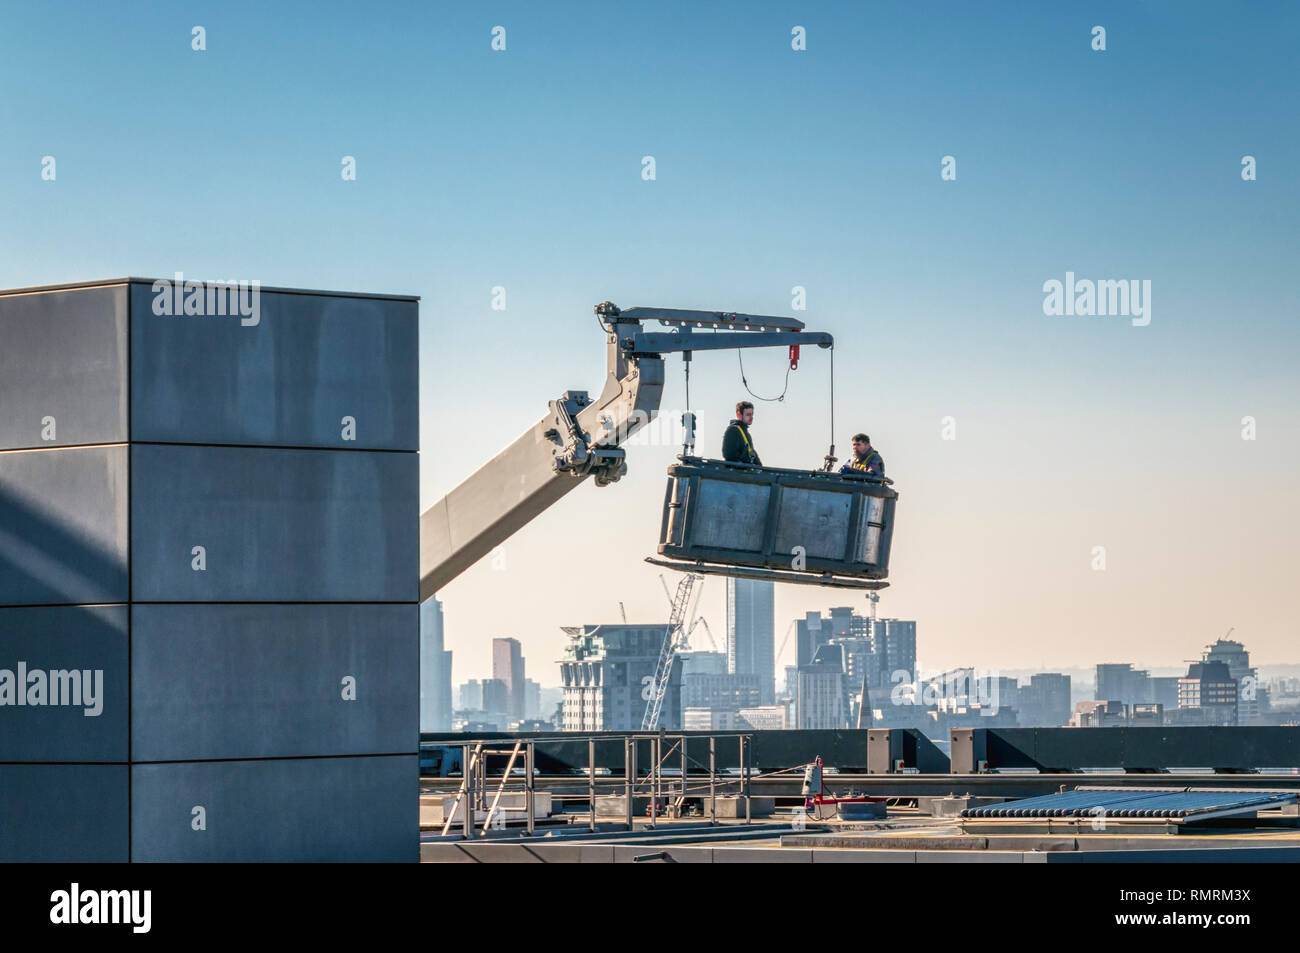 Two workers prepare to descend from the top of a tall building working from an access cradle. City skyline in background. Stock Photo